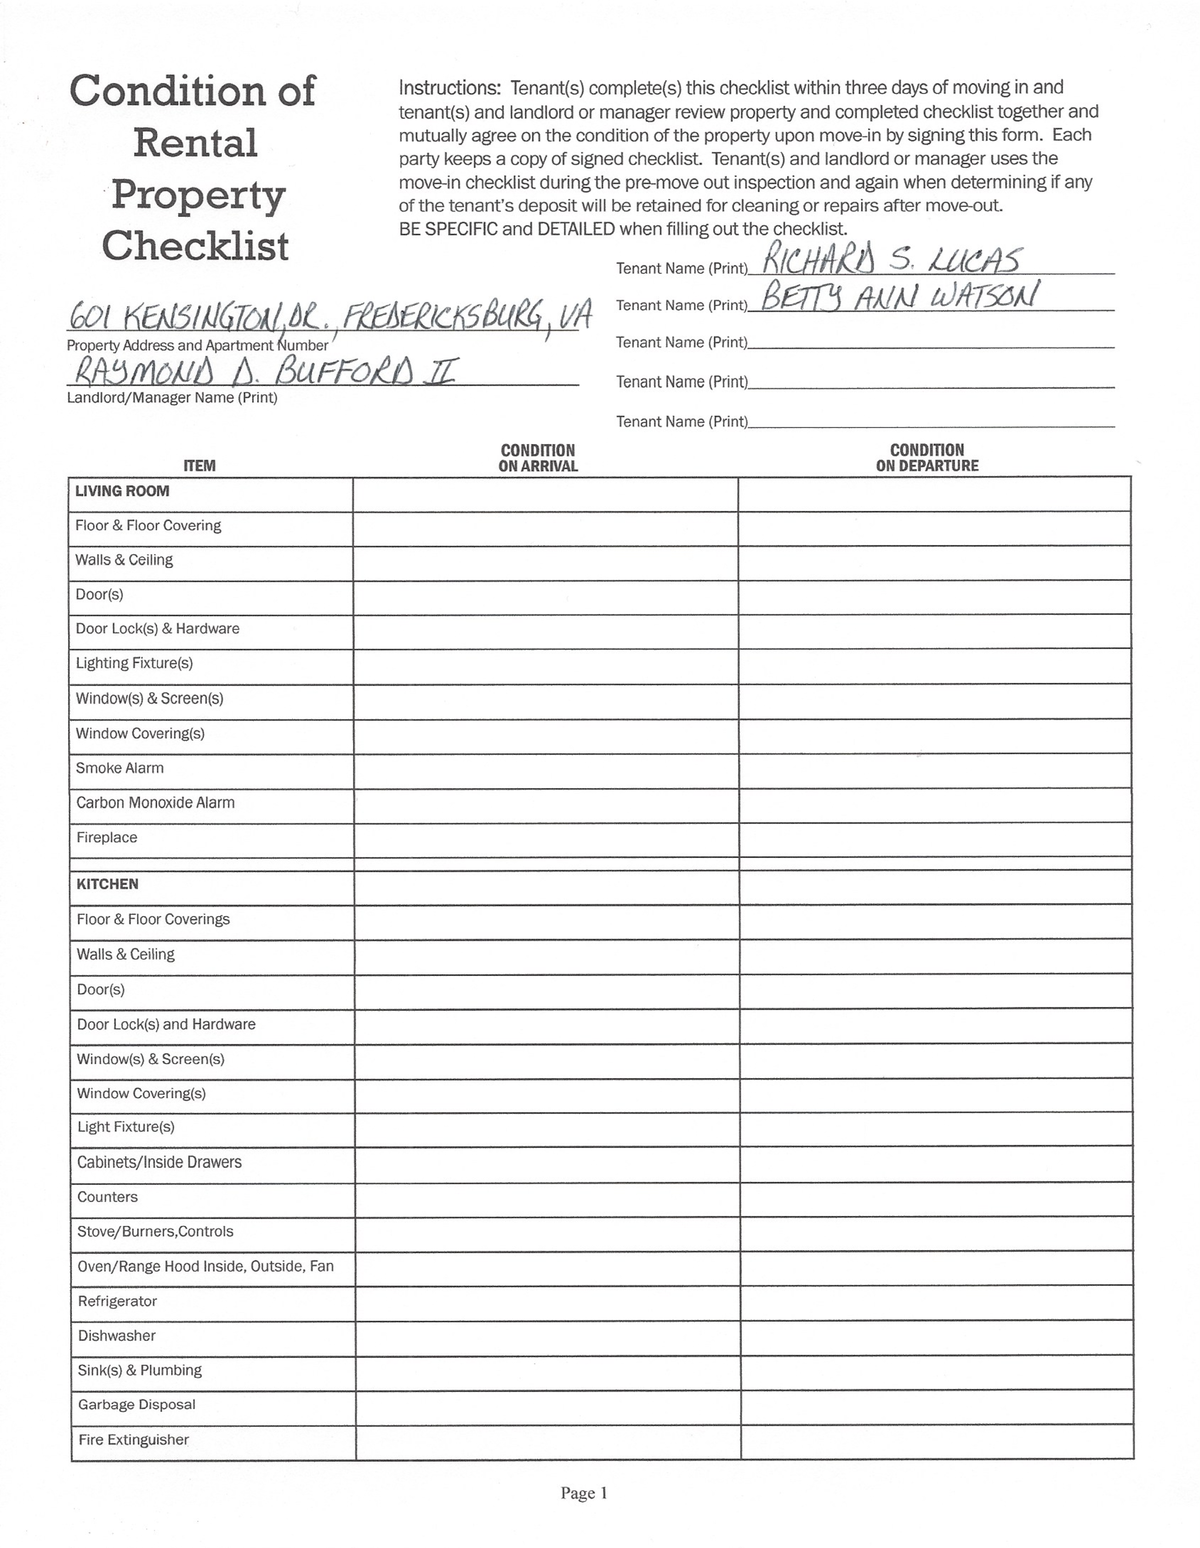 FIrst Page Inspection form - ENGL216 - Studocu